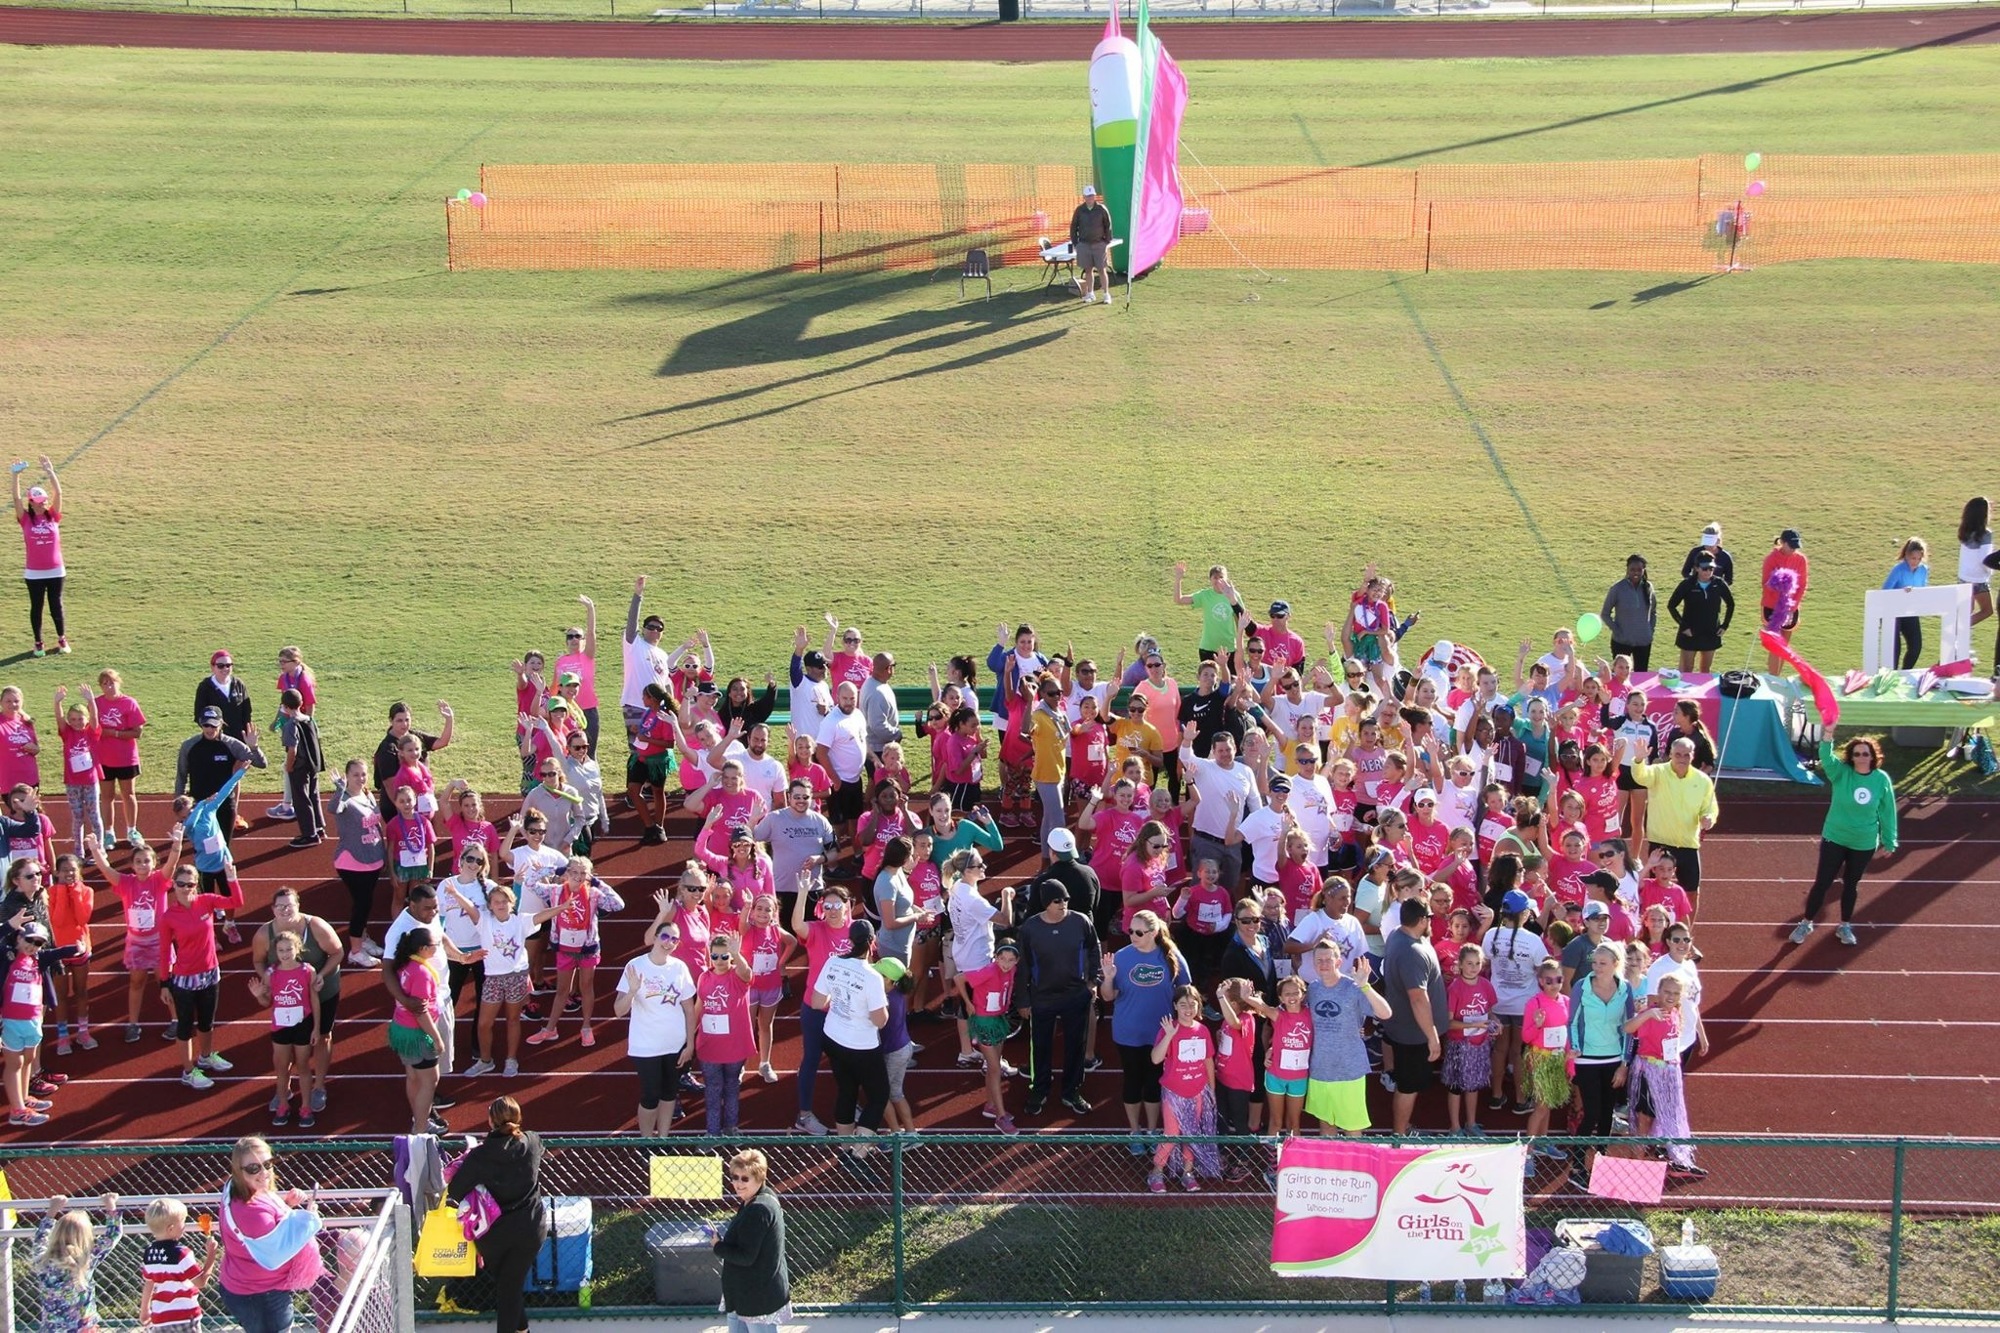 Volunteers and students of Girls on the Run pose for a photo during the 5K event. Photo courtesy of Ashley Novak